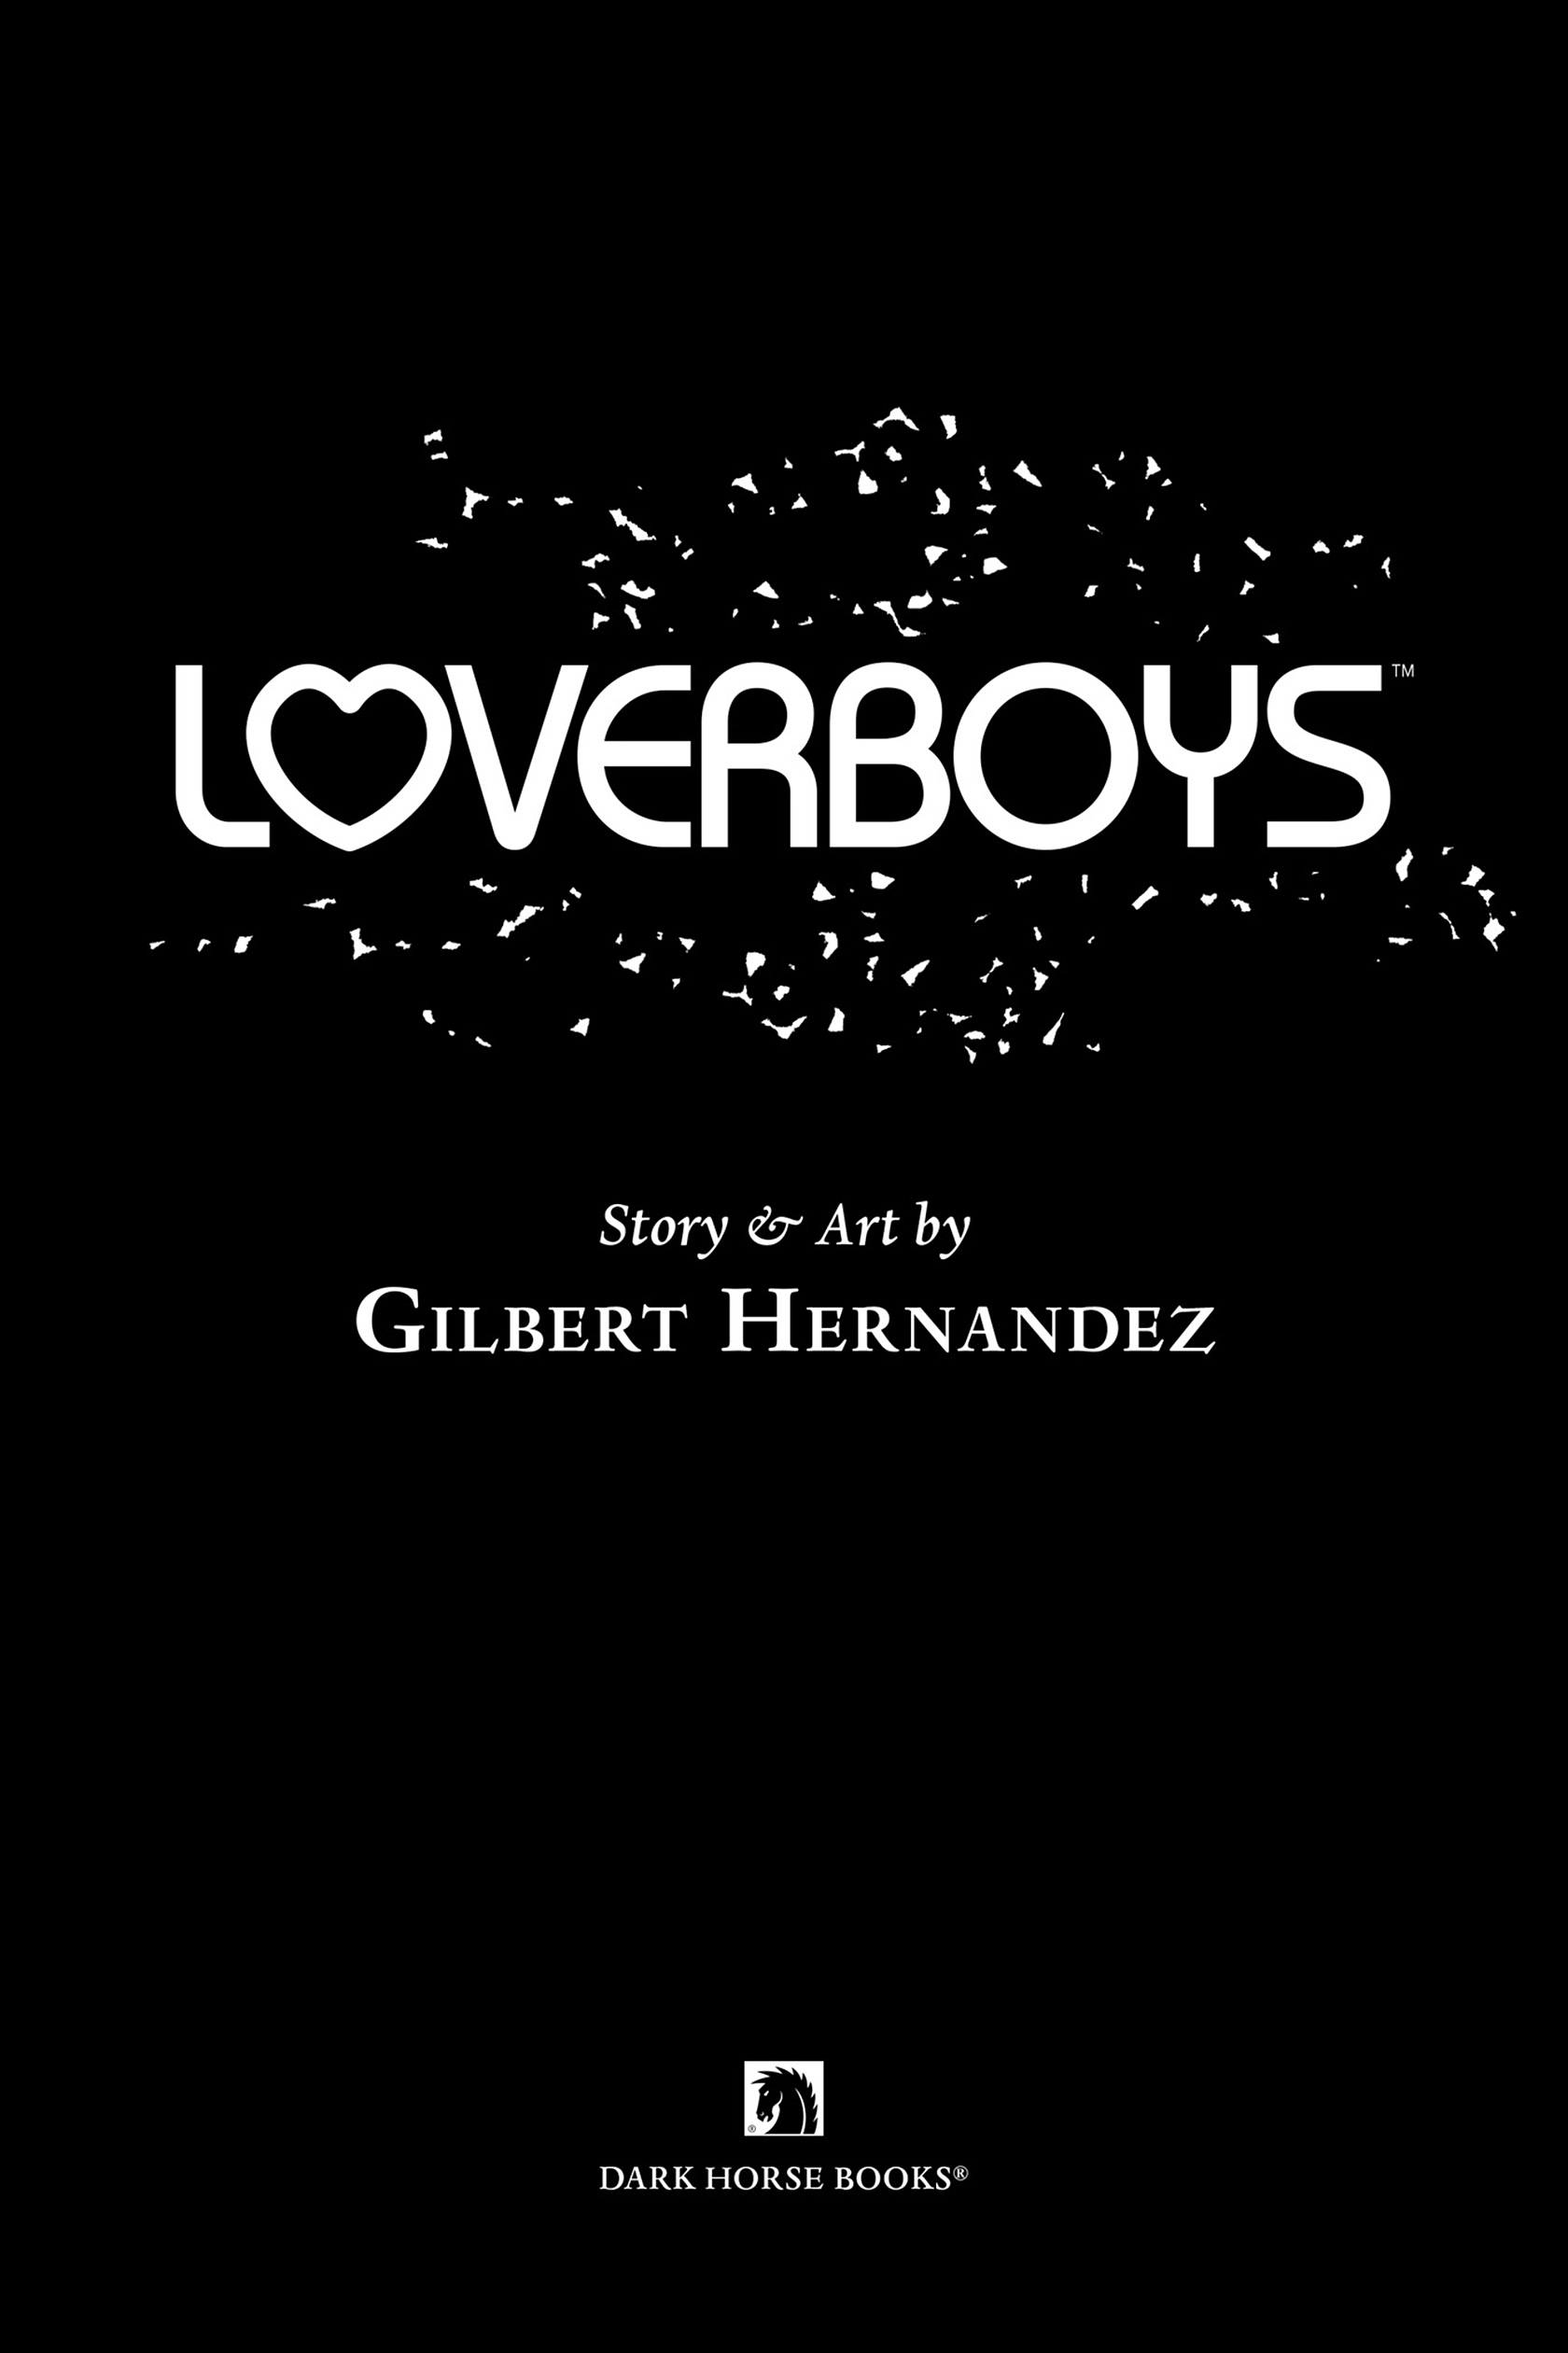 Read online Loverboys comic -  Issue # TPB - 5